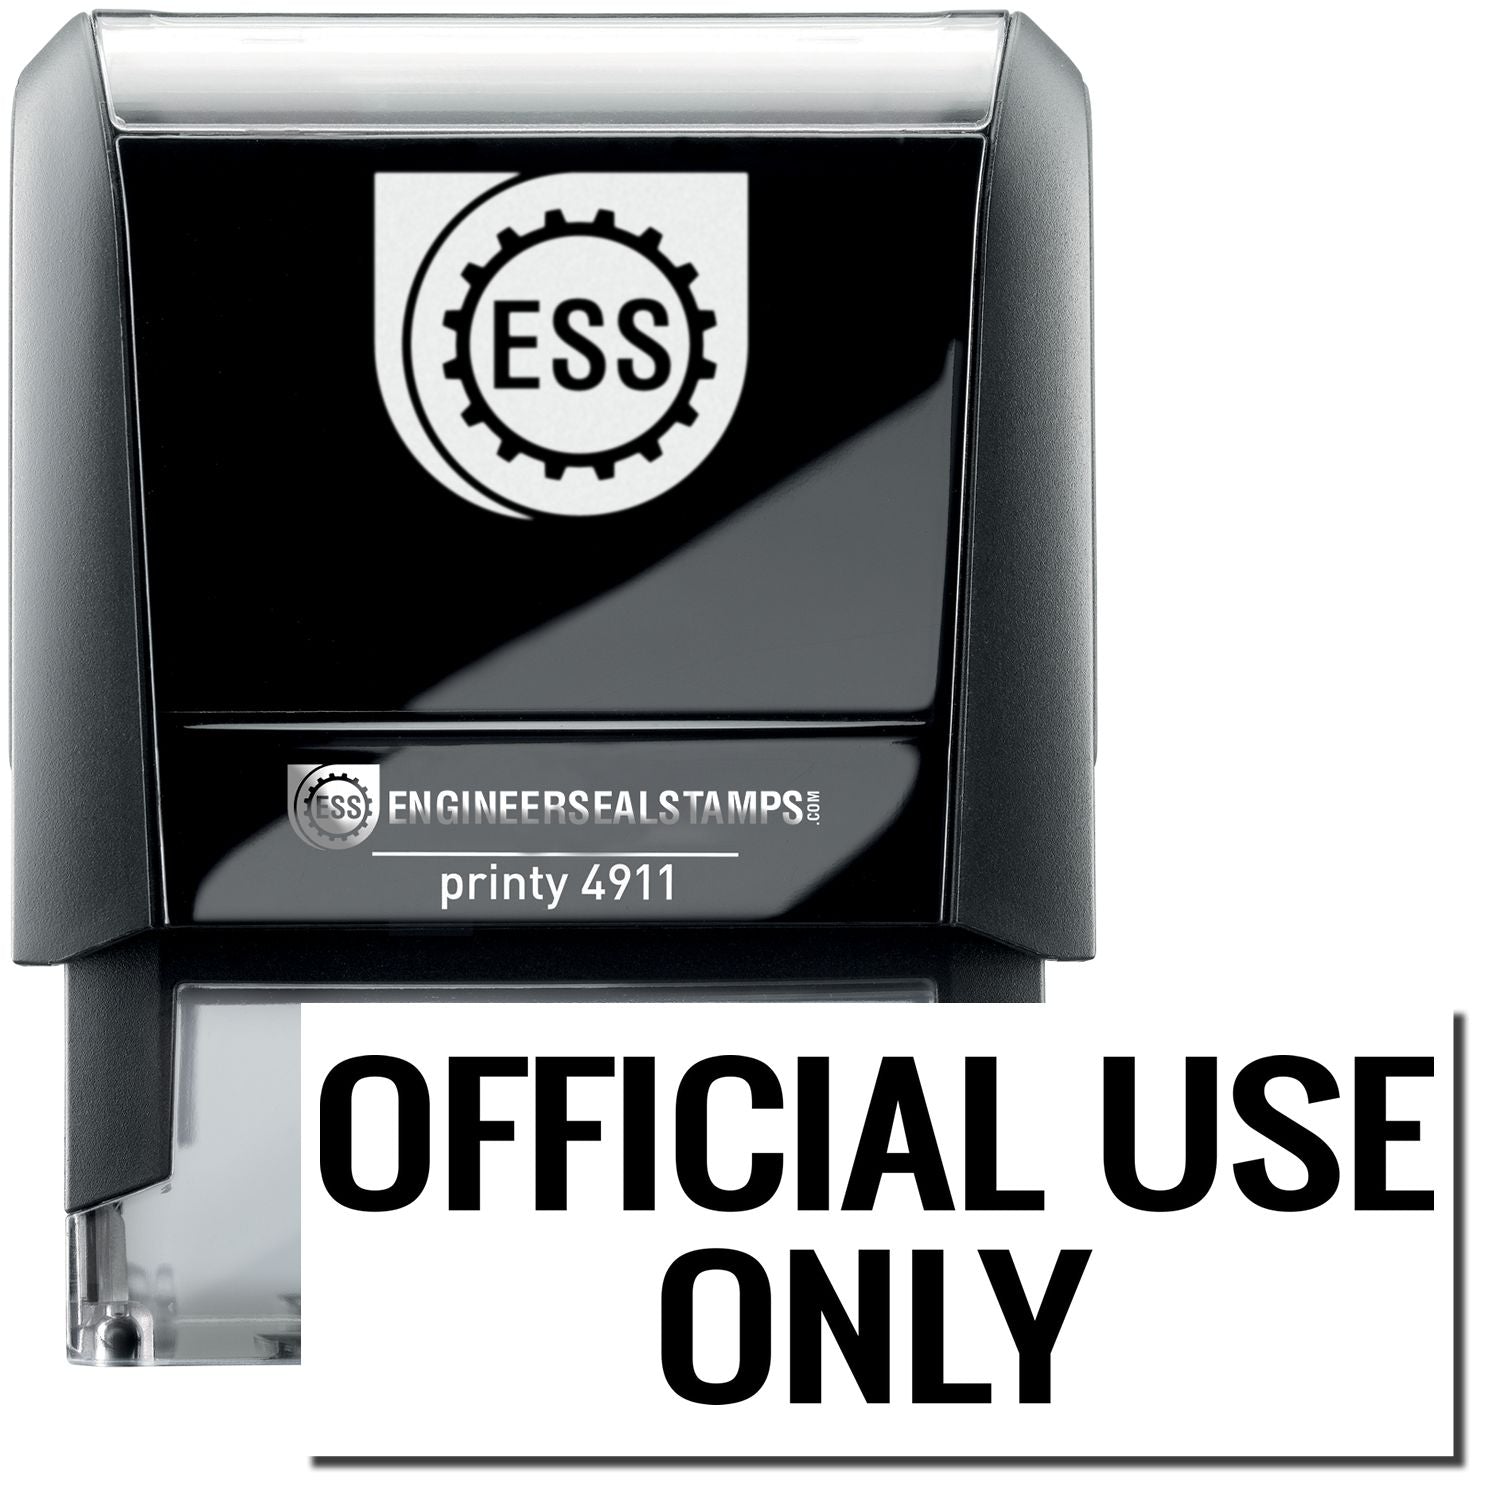 A self-inking stamp with a stamped image showing how the text "OFFICIAL USE ONLY" is displayed after stamping.